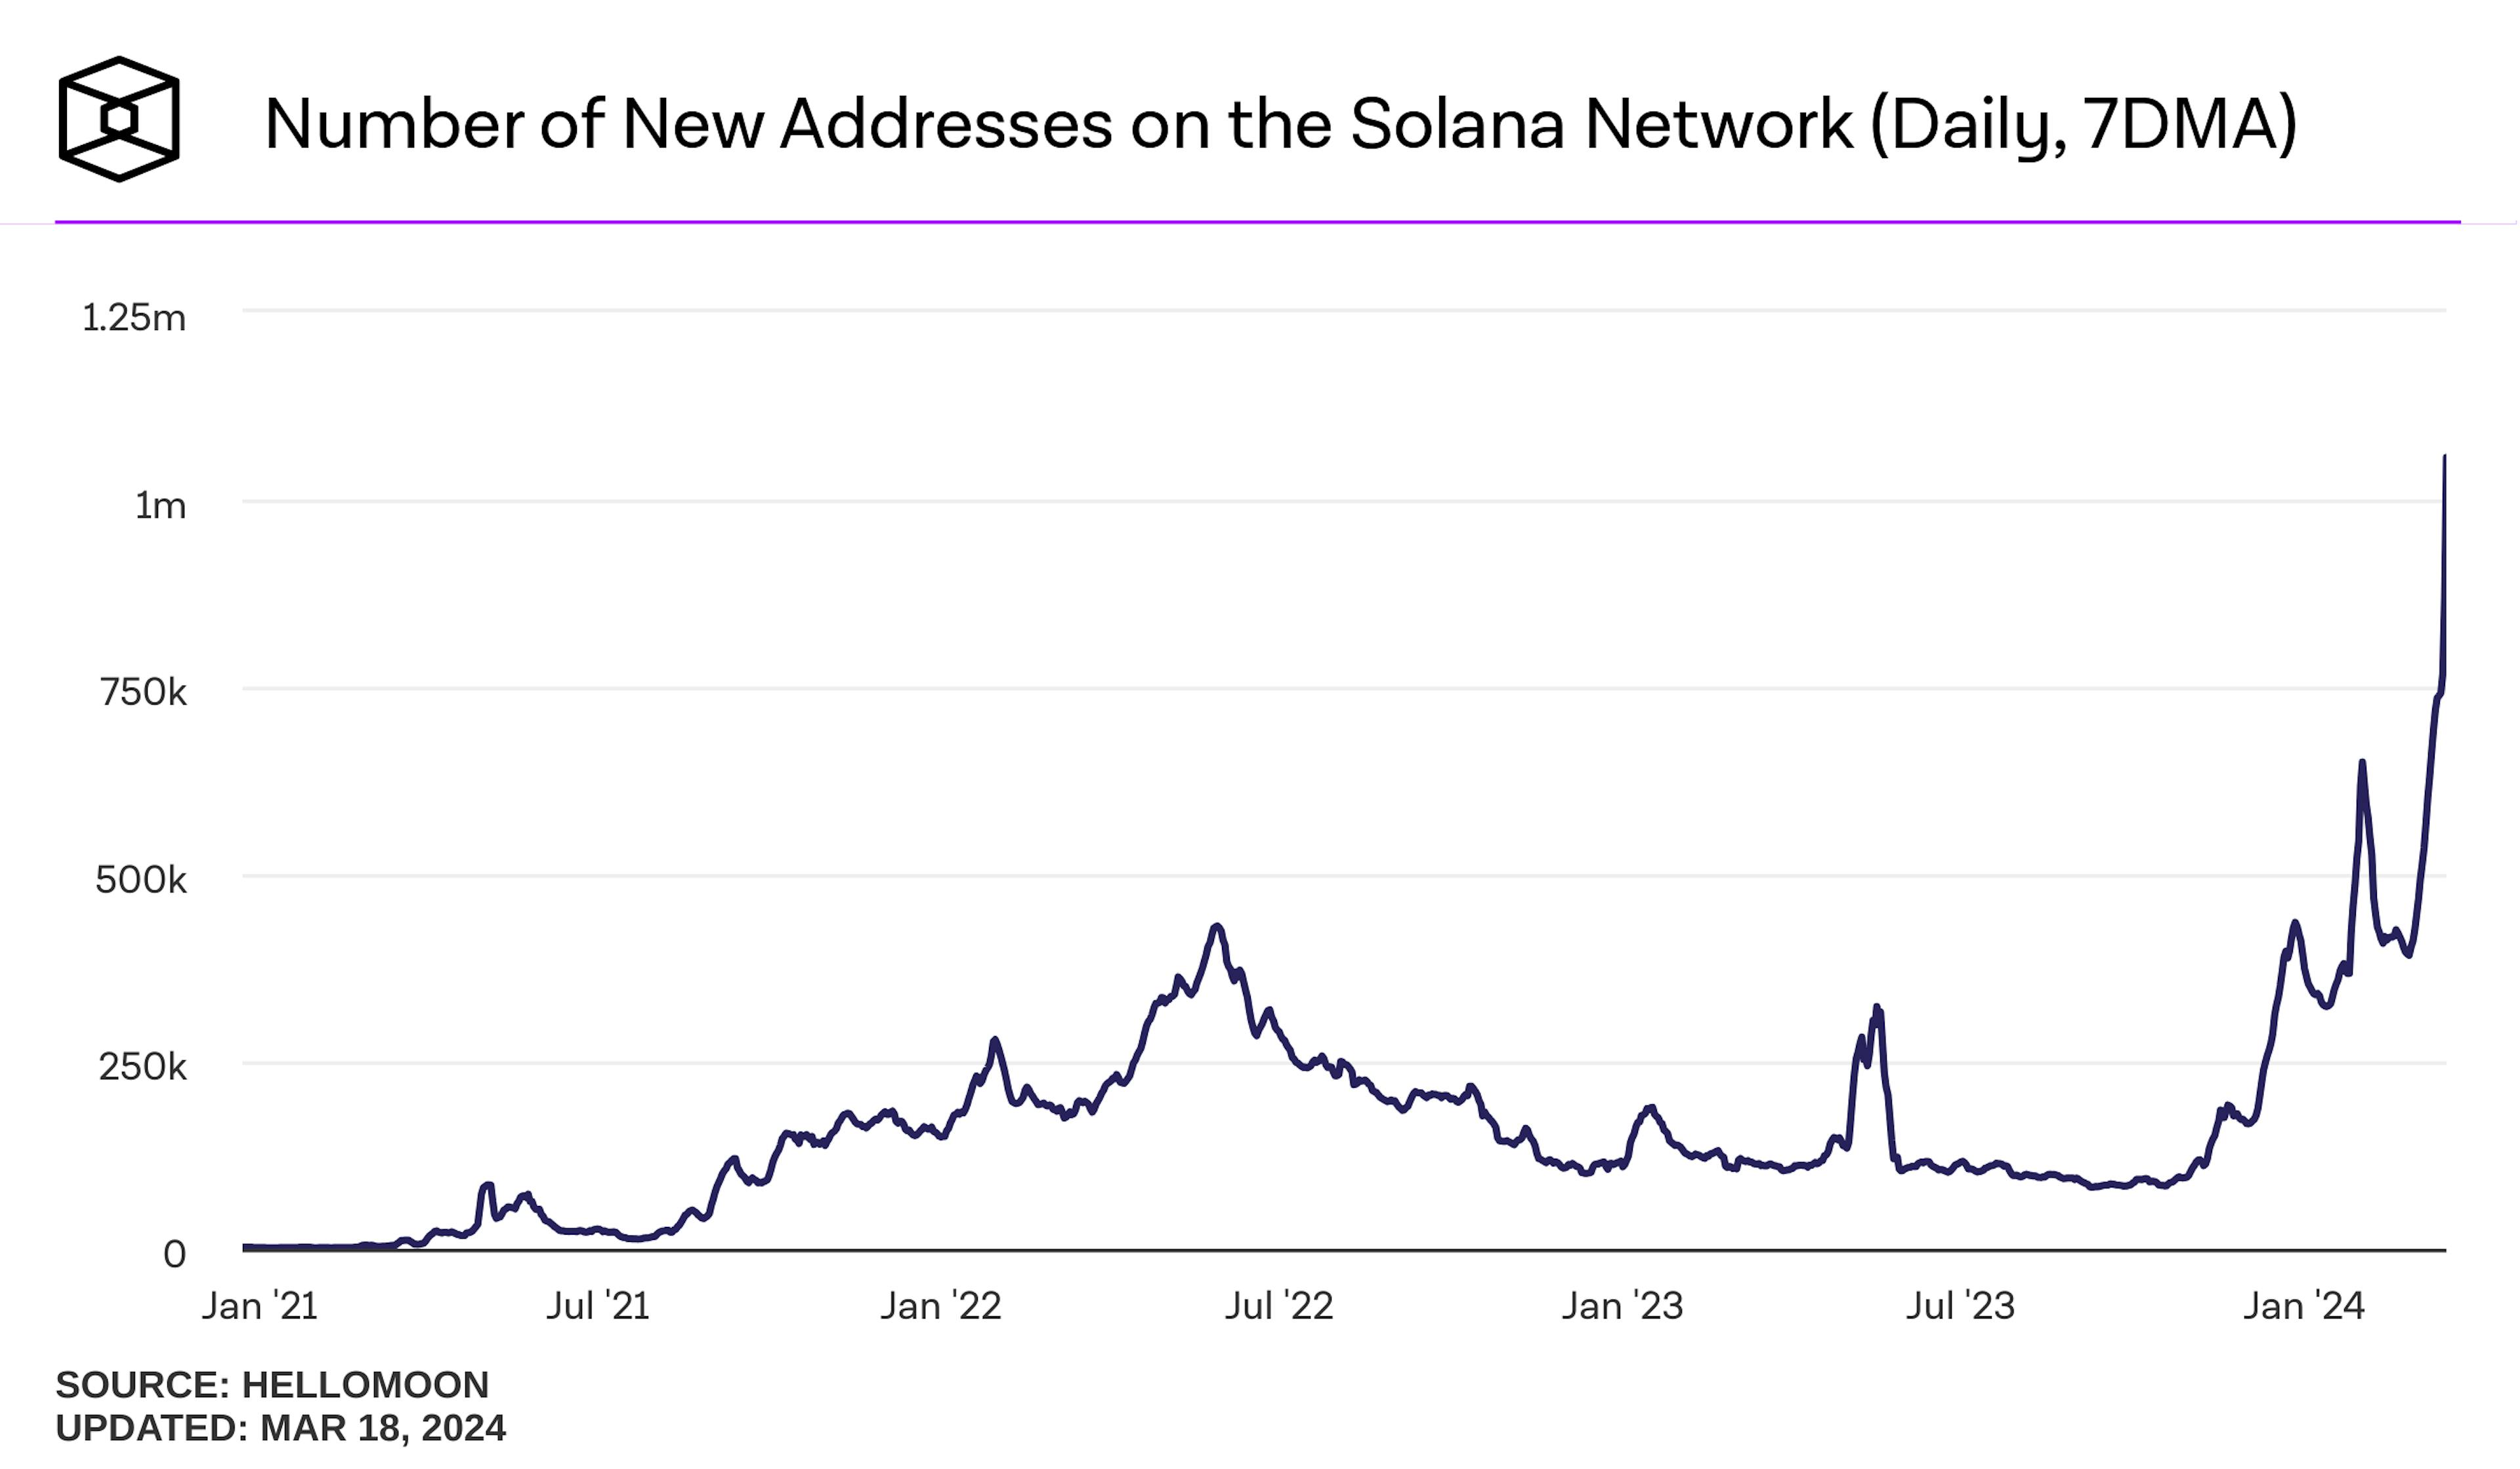 Number of new addresses on the Solana network